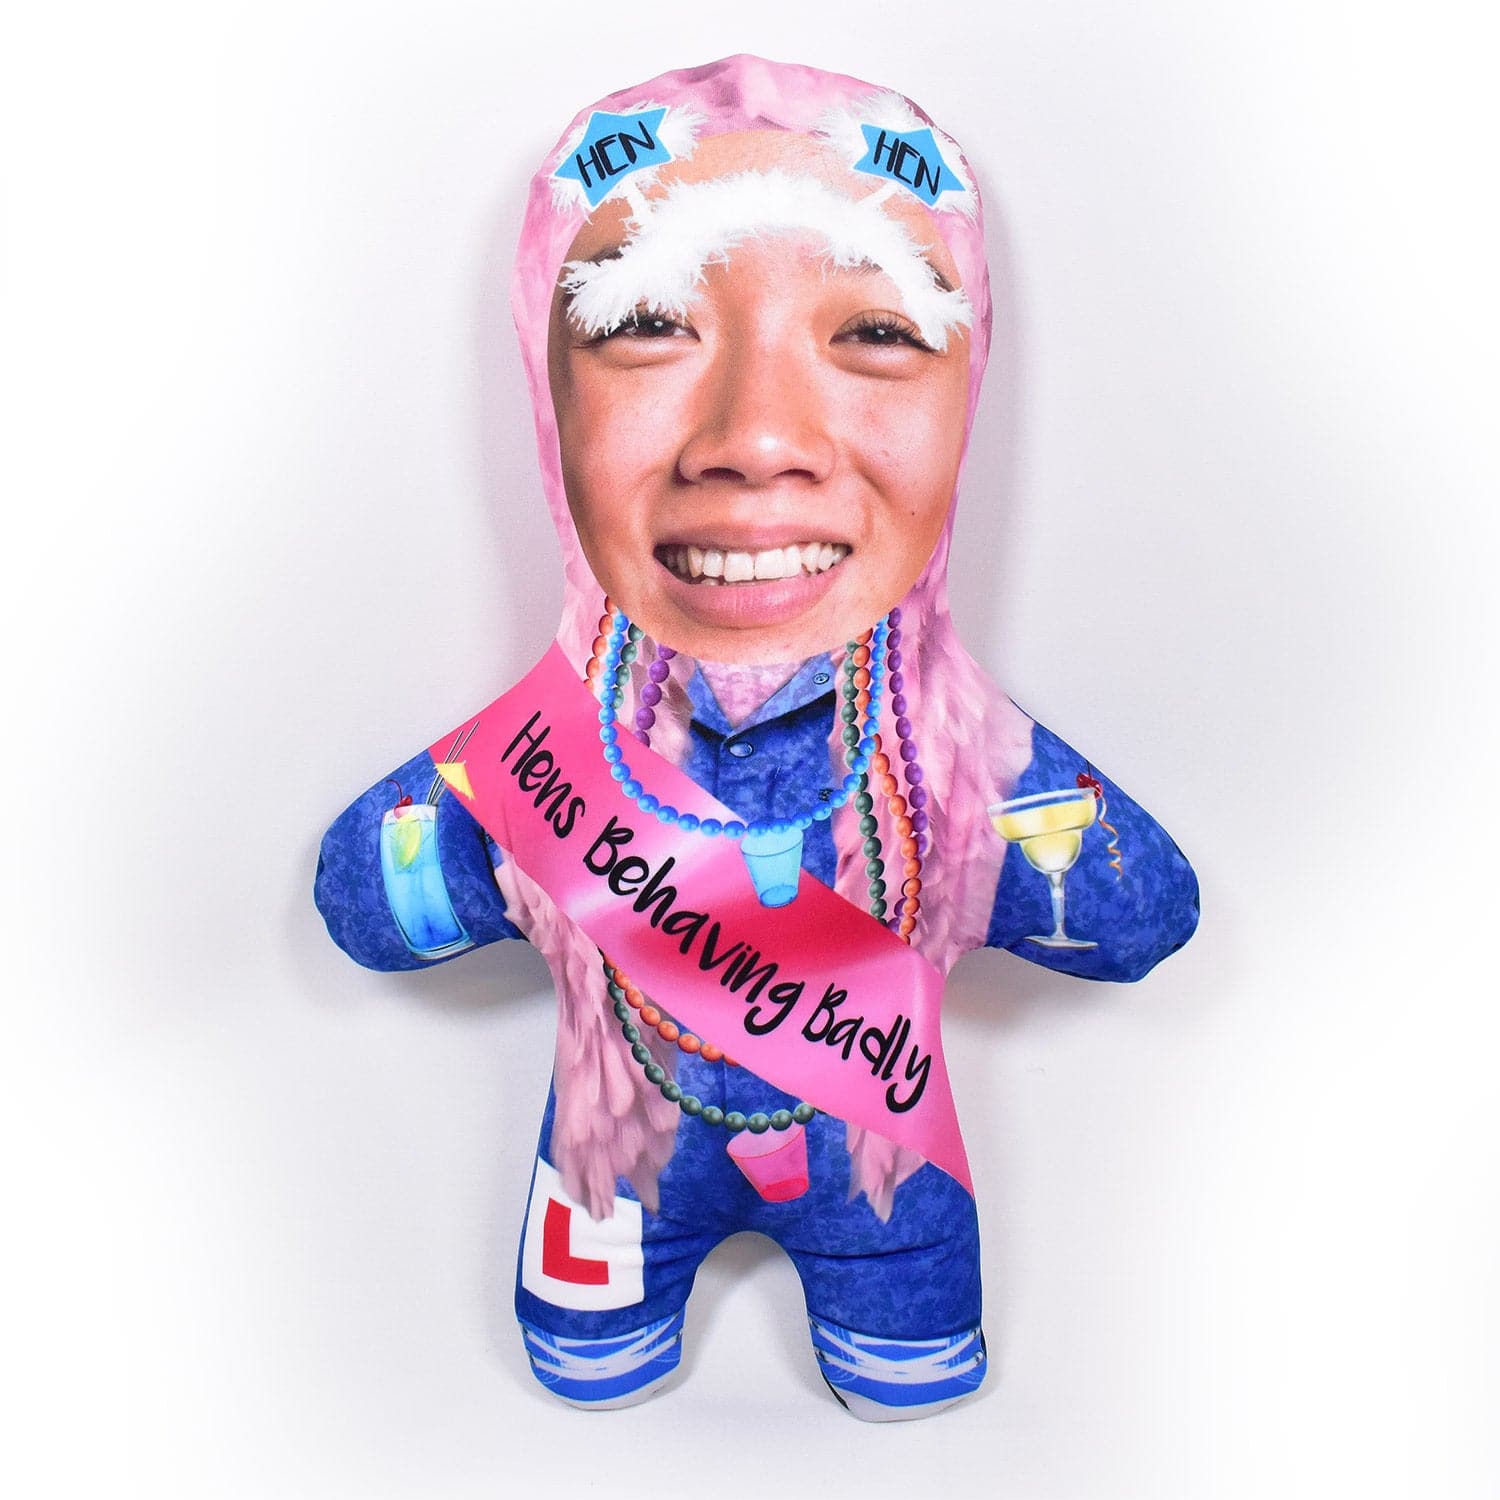 Hen Party - Blue Jumpsuit - Personalised Mini Me Doll